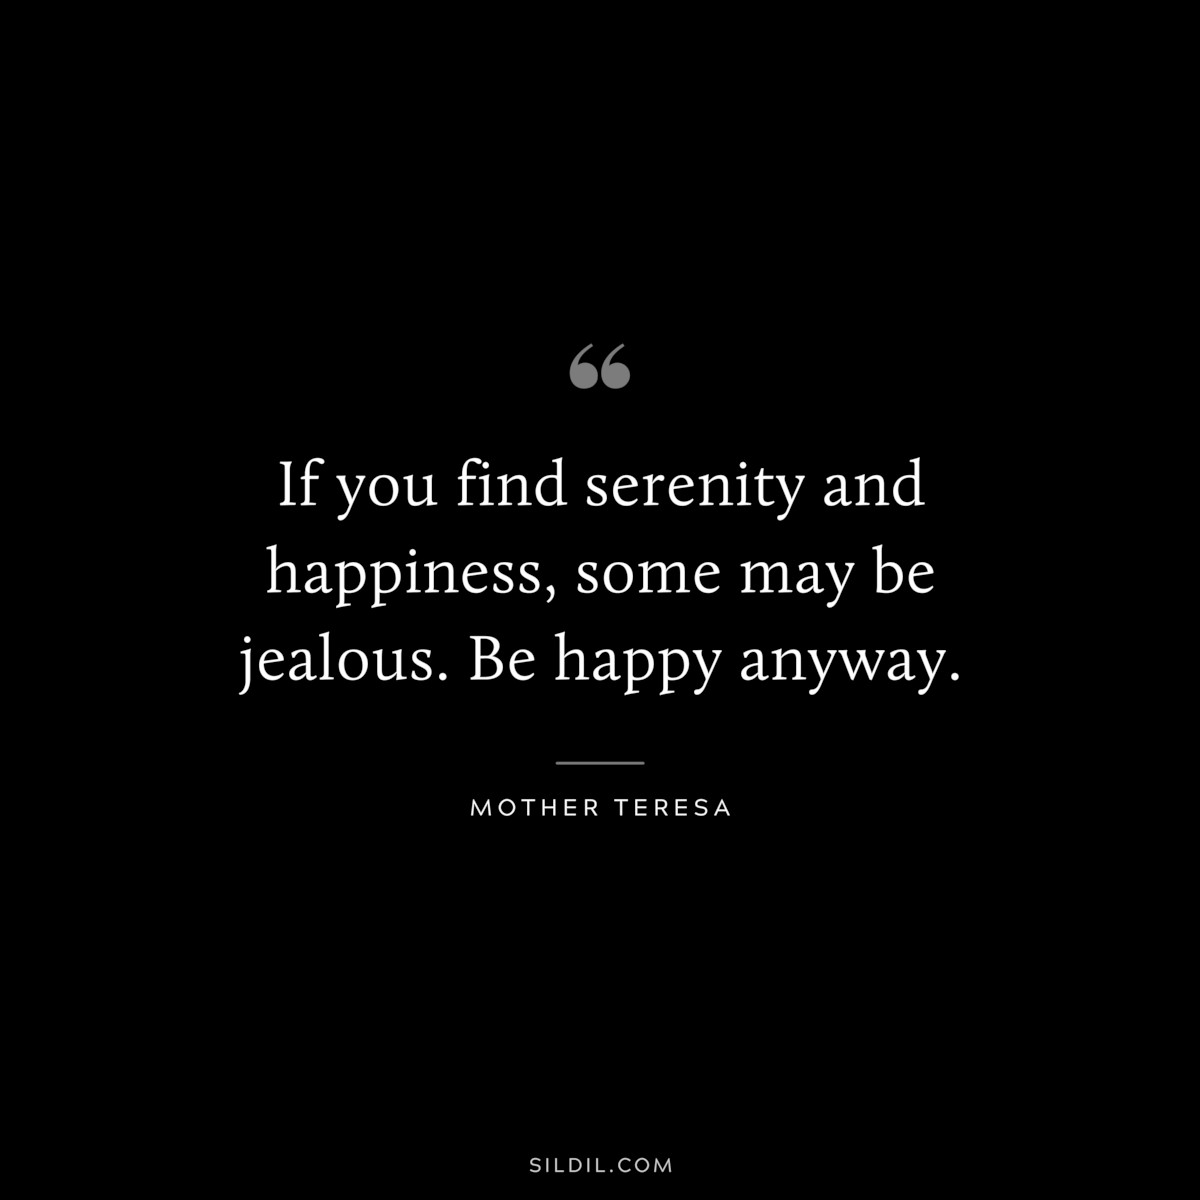 If you find serenity and happiness, some may be jealous. Be happy anyway. ― Mother Teresa